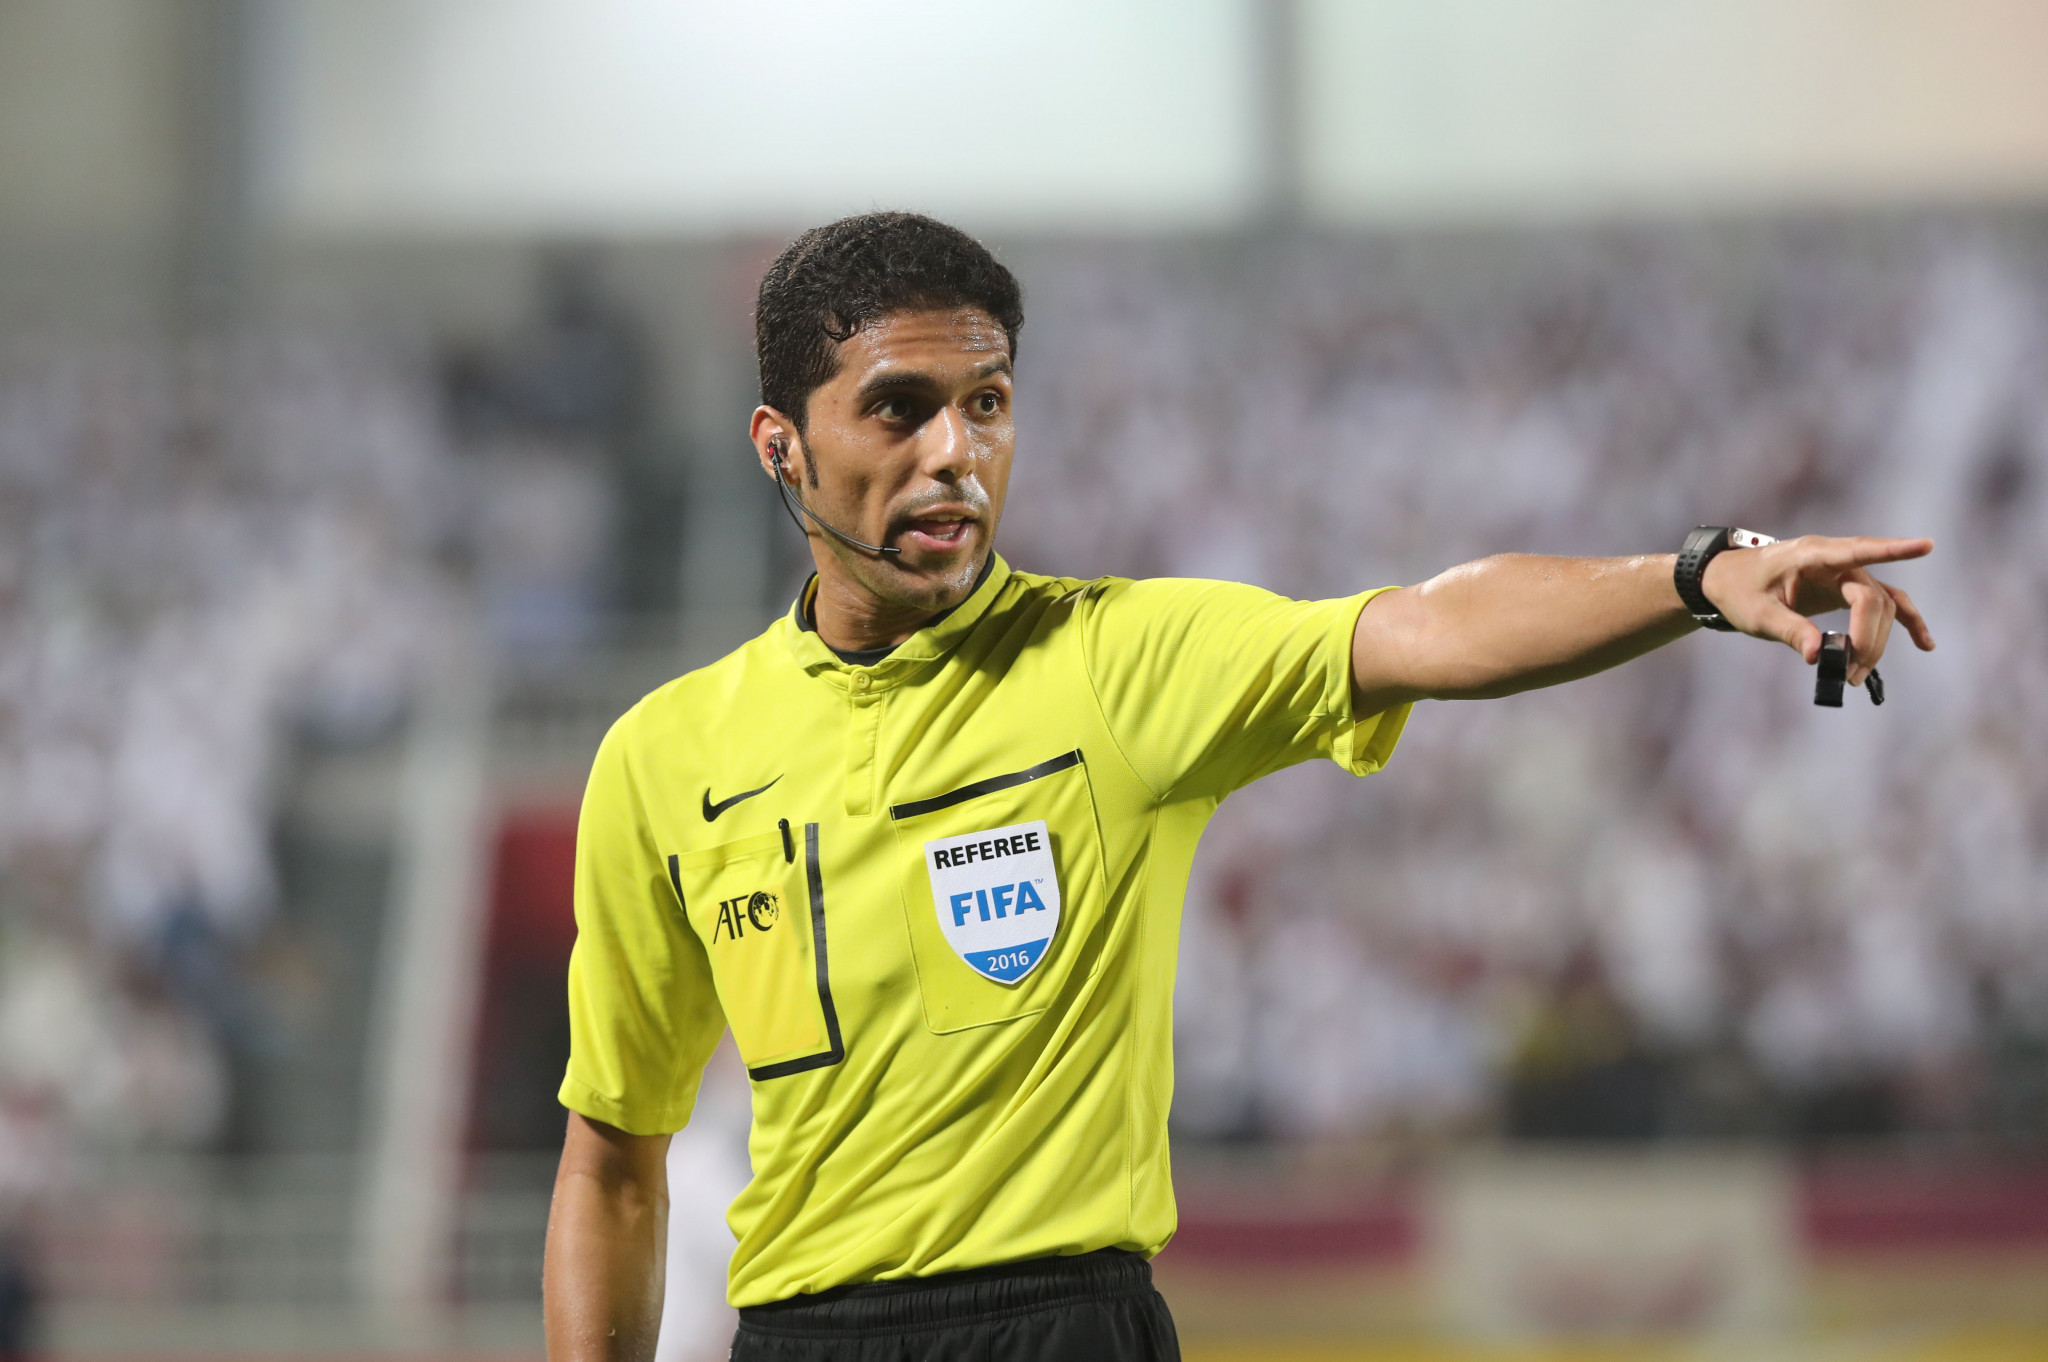 Referee Fahad Al-Mirdasi has been dropped from officiating at the World Cup ©Getty Images